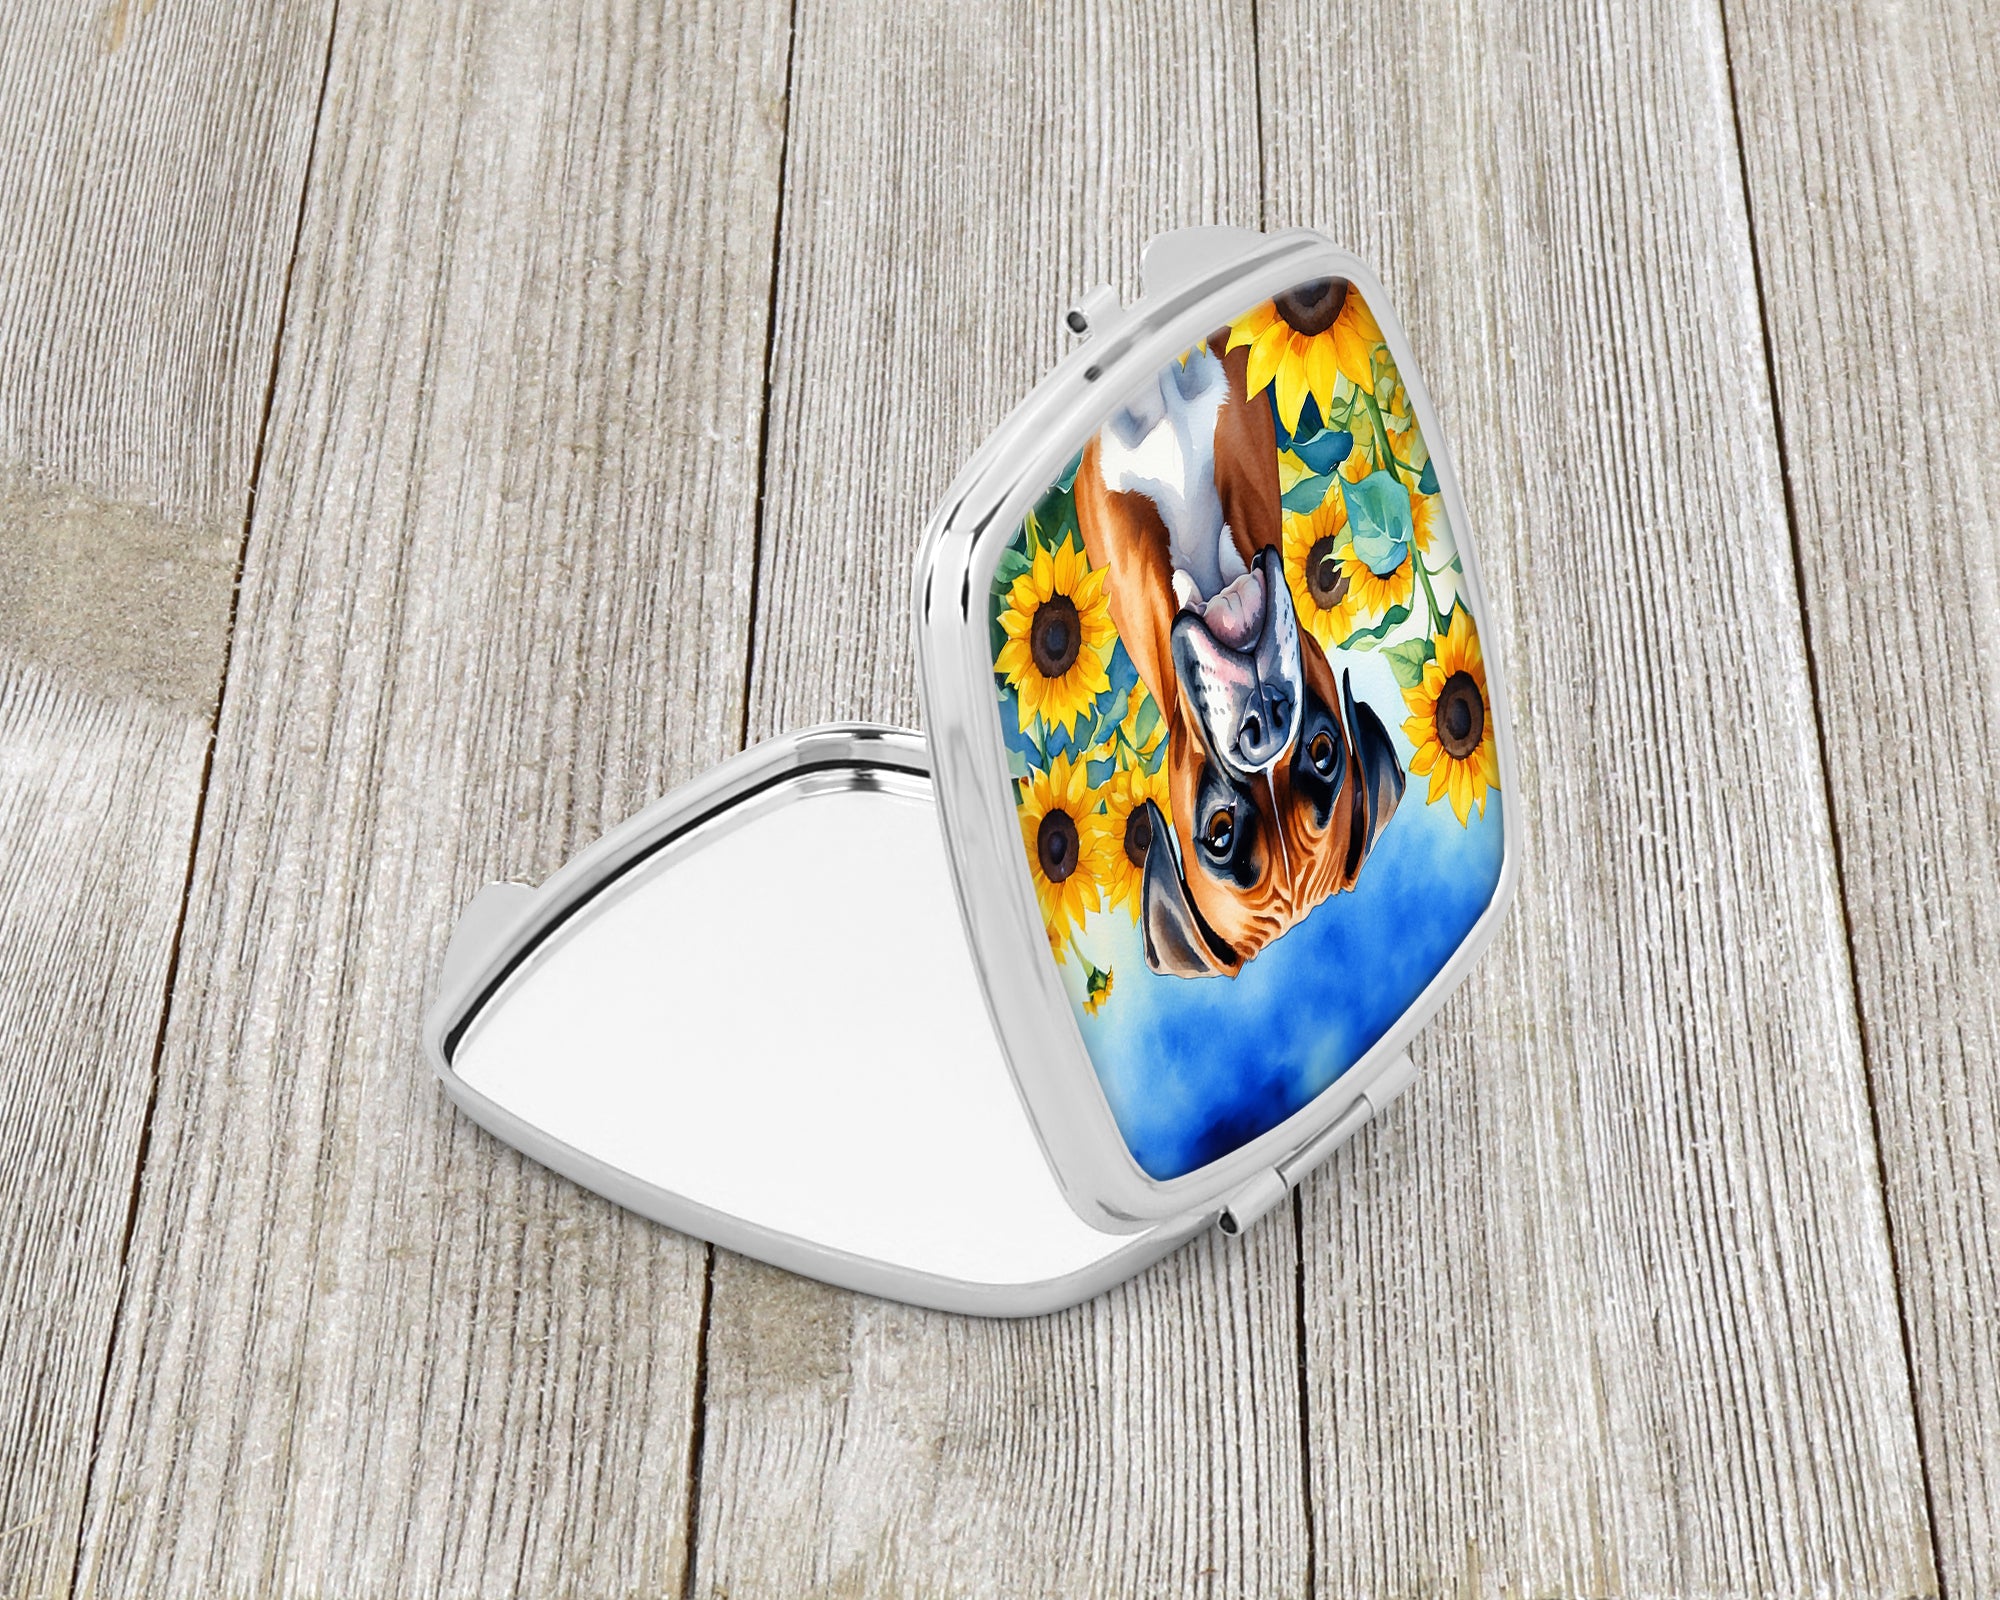 Boxer in Sunflowers Compact Mirror